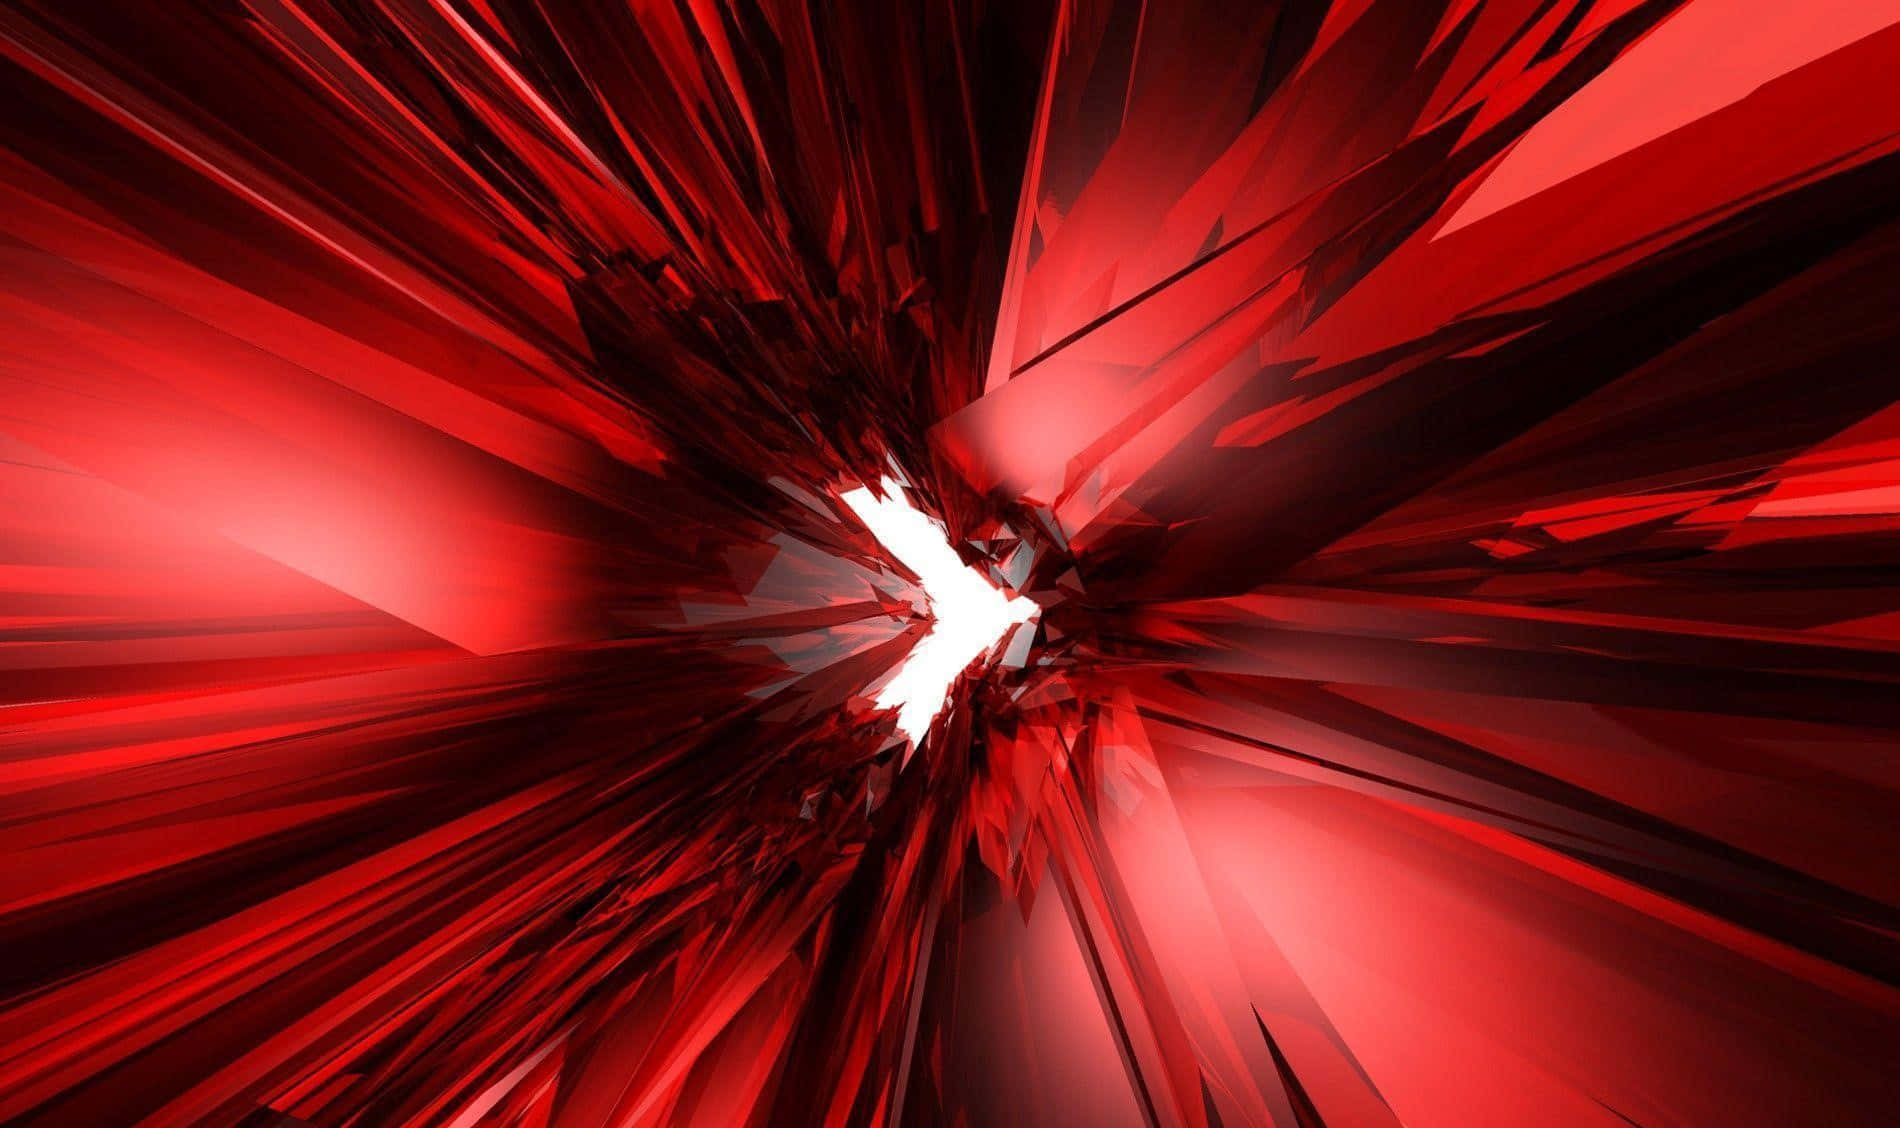 Caption: Vibrant Solid Red Background